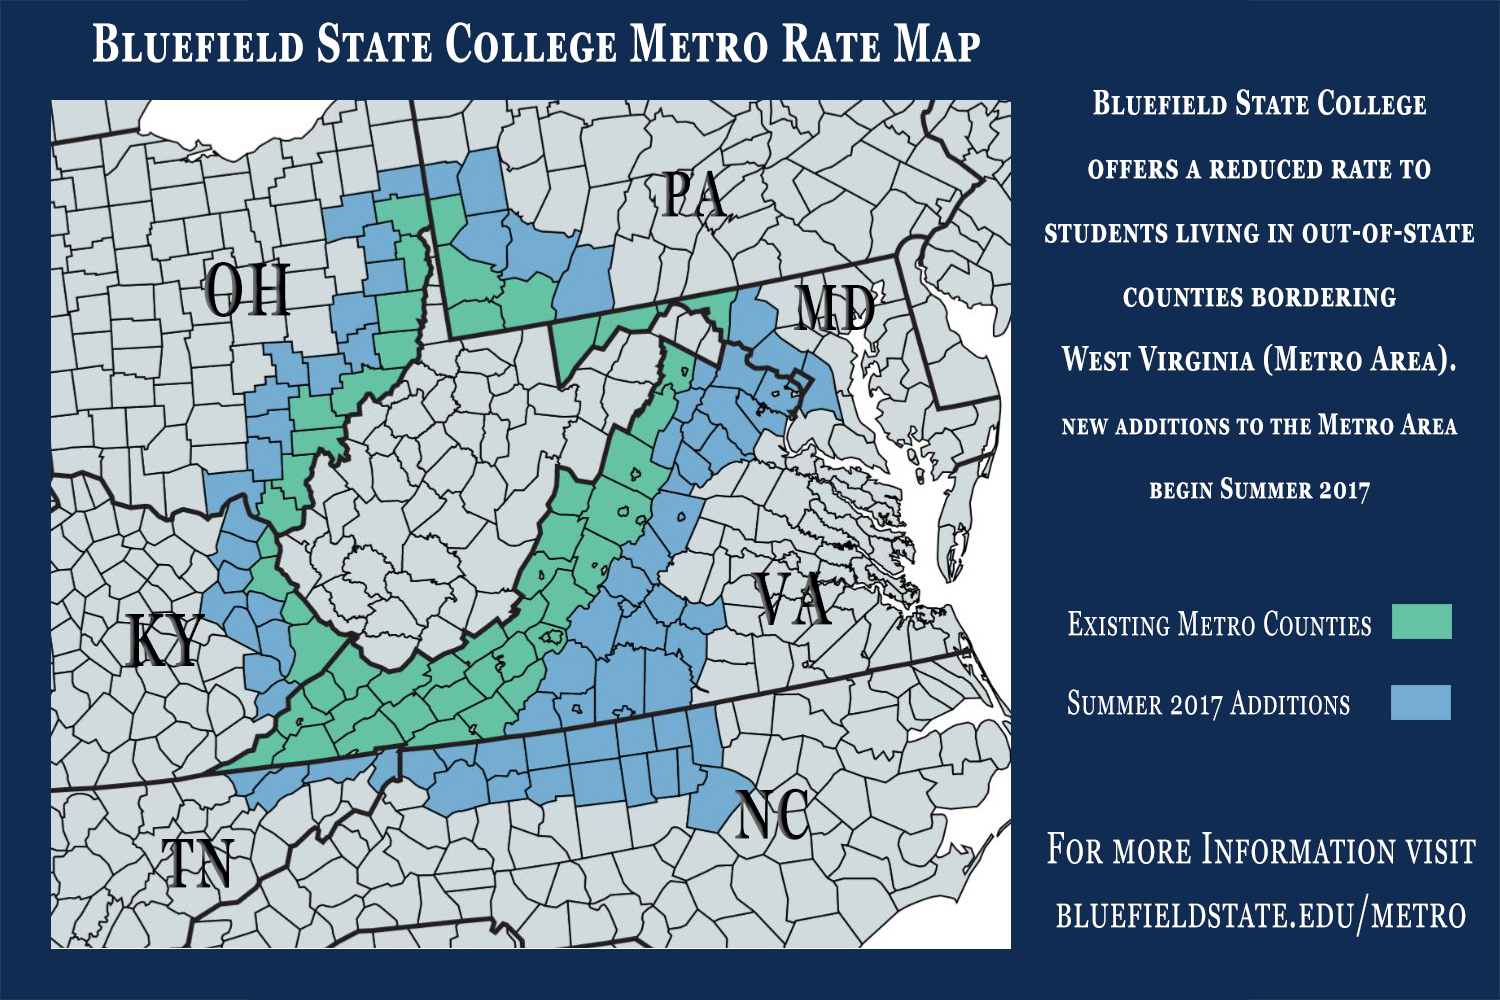 Bluefield State College Metro Rate Map